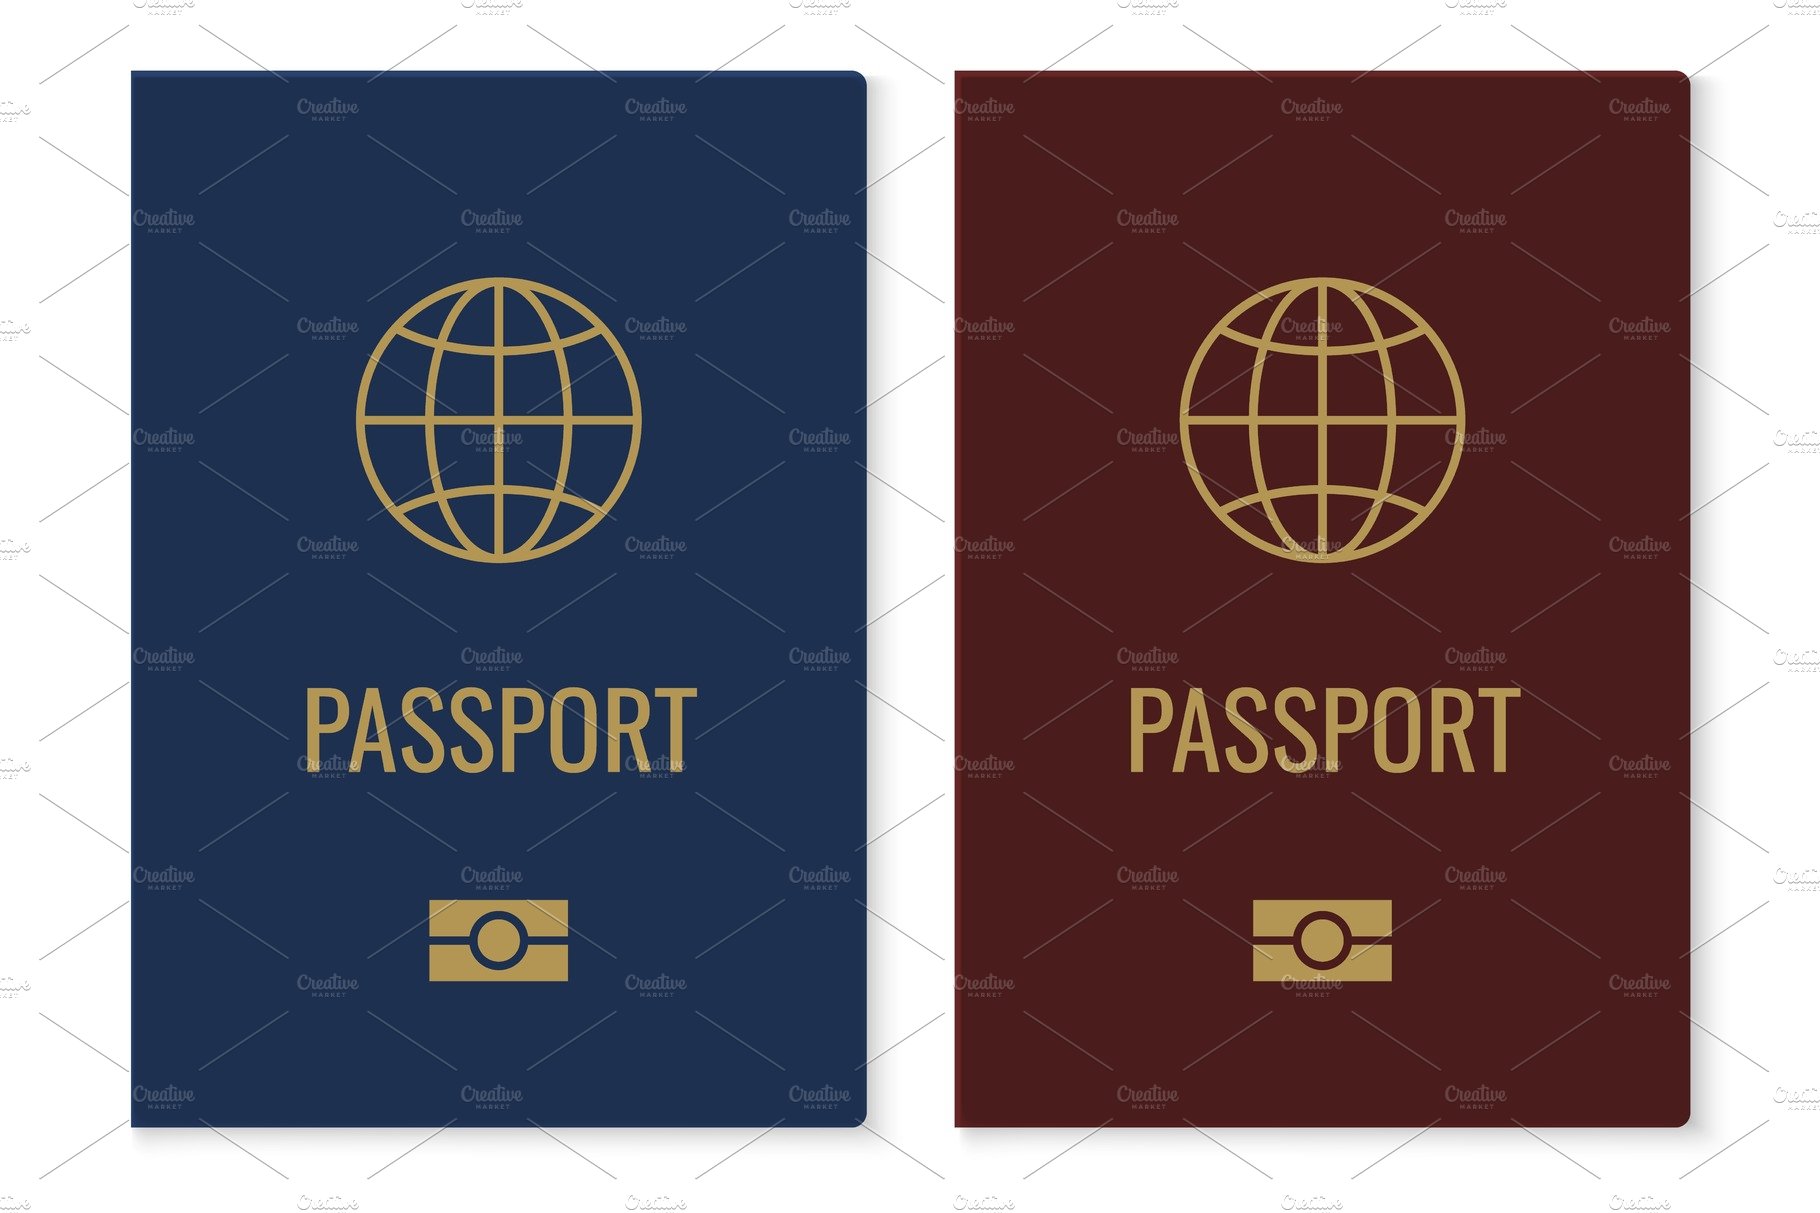 Passport covers with map. Realistic cover image.